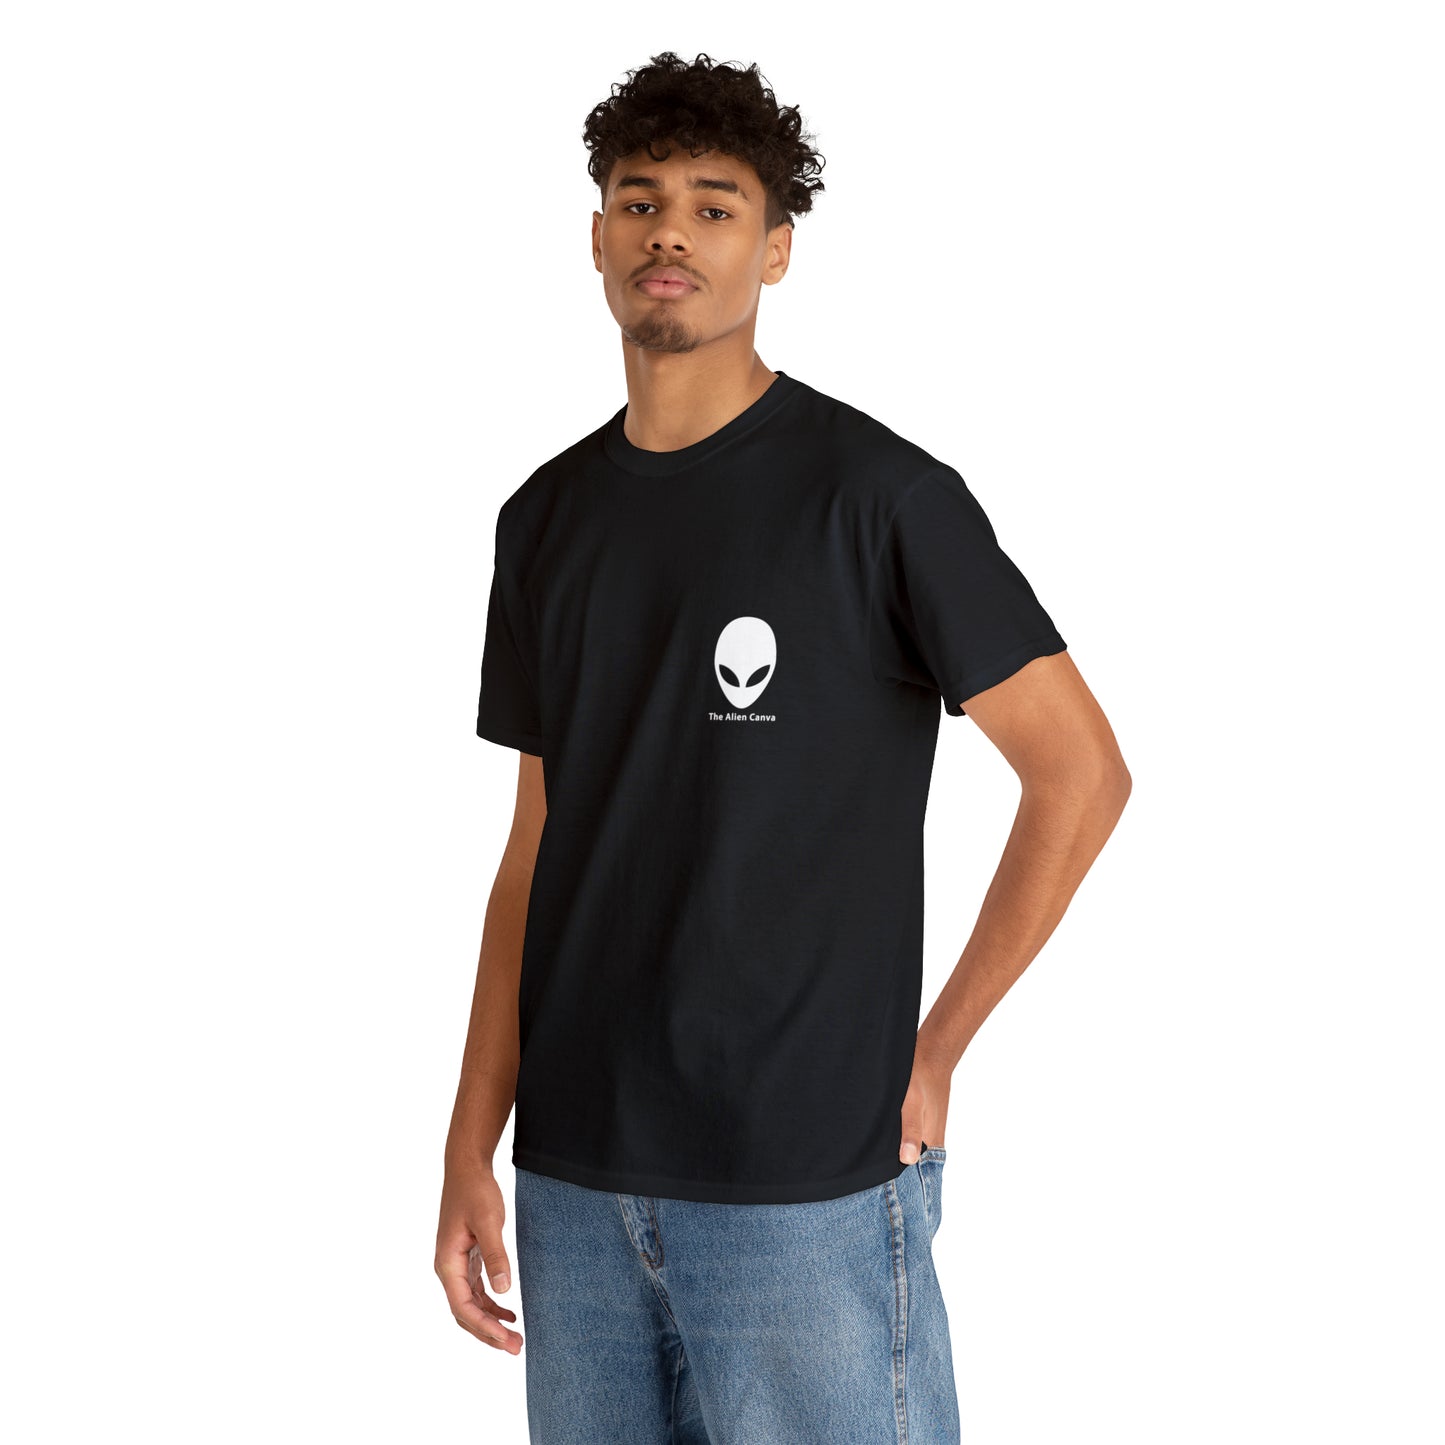 "A Breezy Skyscape: A Combination of Tradition and Modernity" - The Alien T-shirt